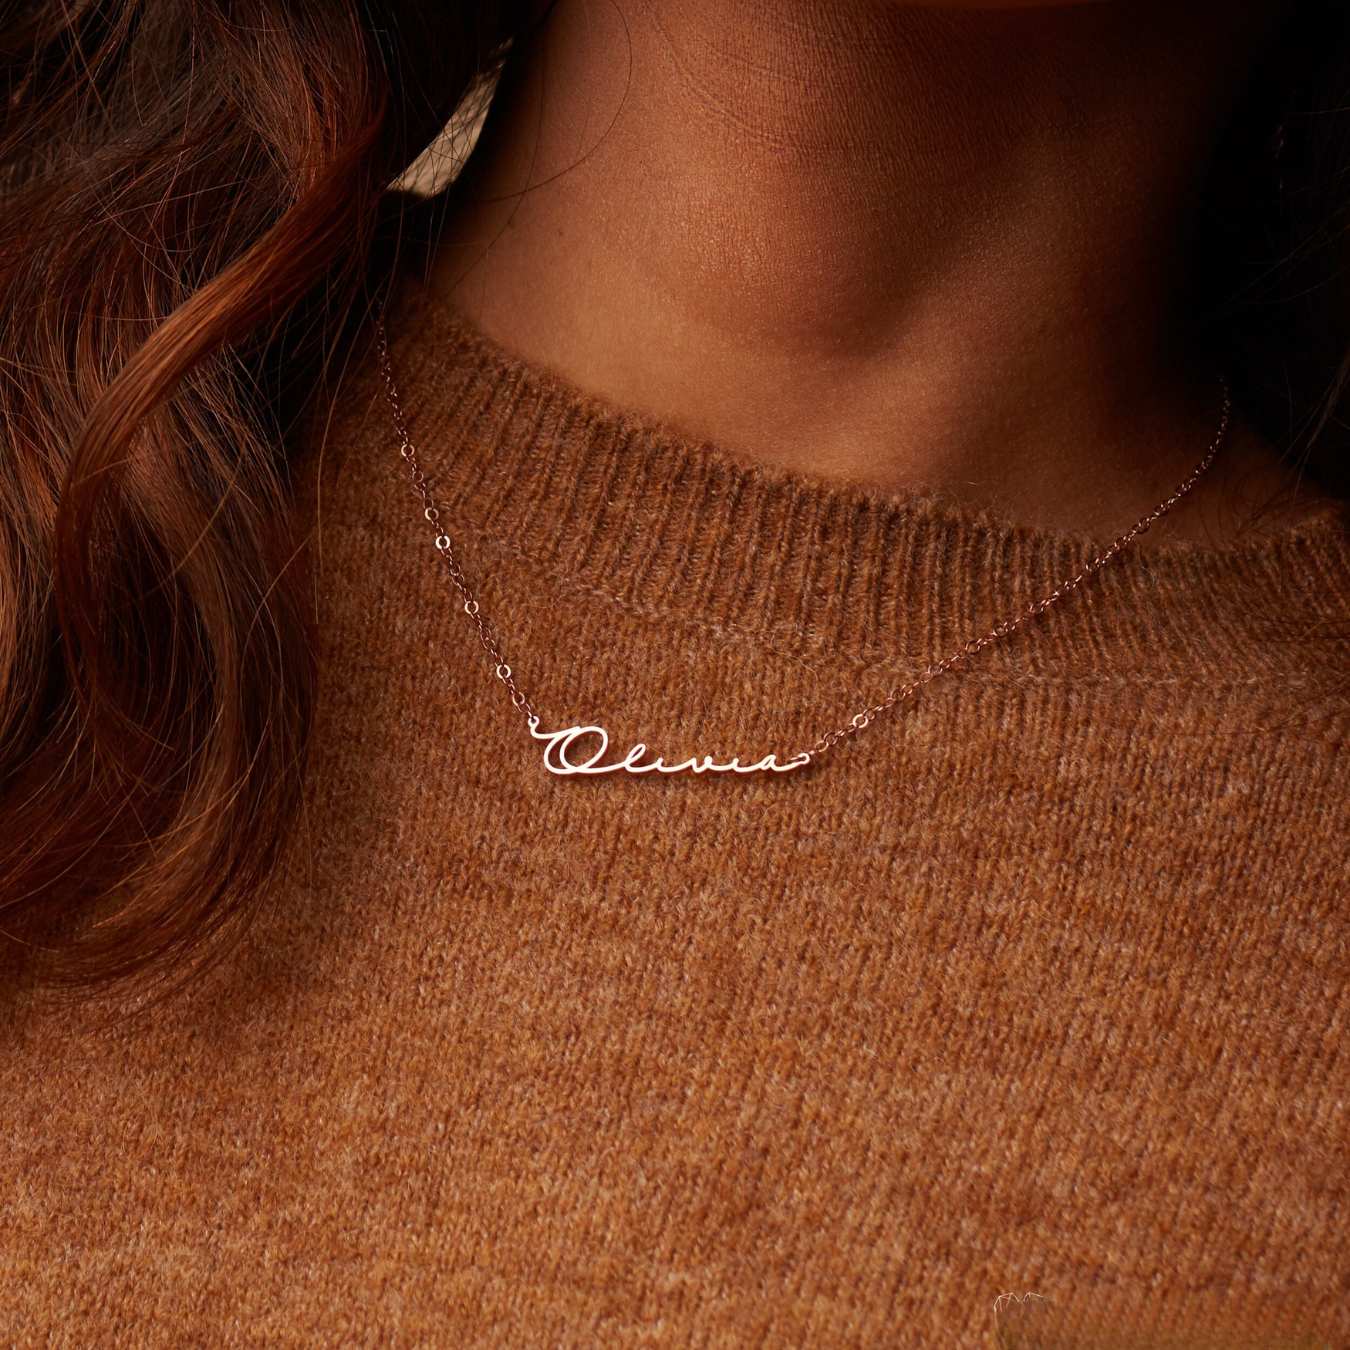 Stylish Name Necklace Review: Perfect Gift for Her